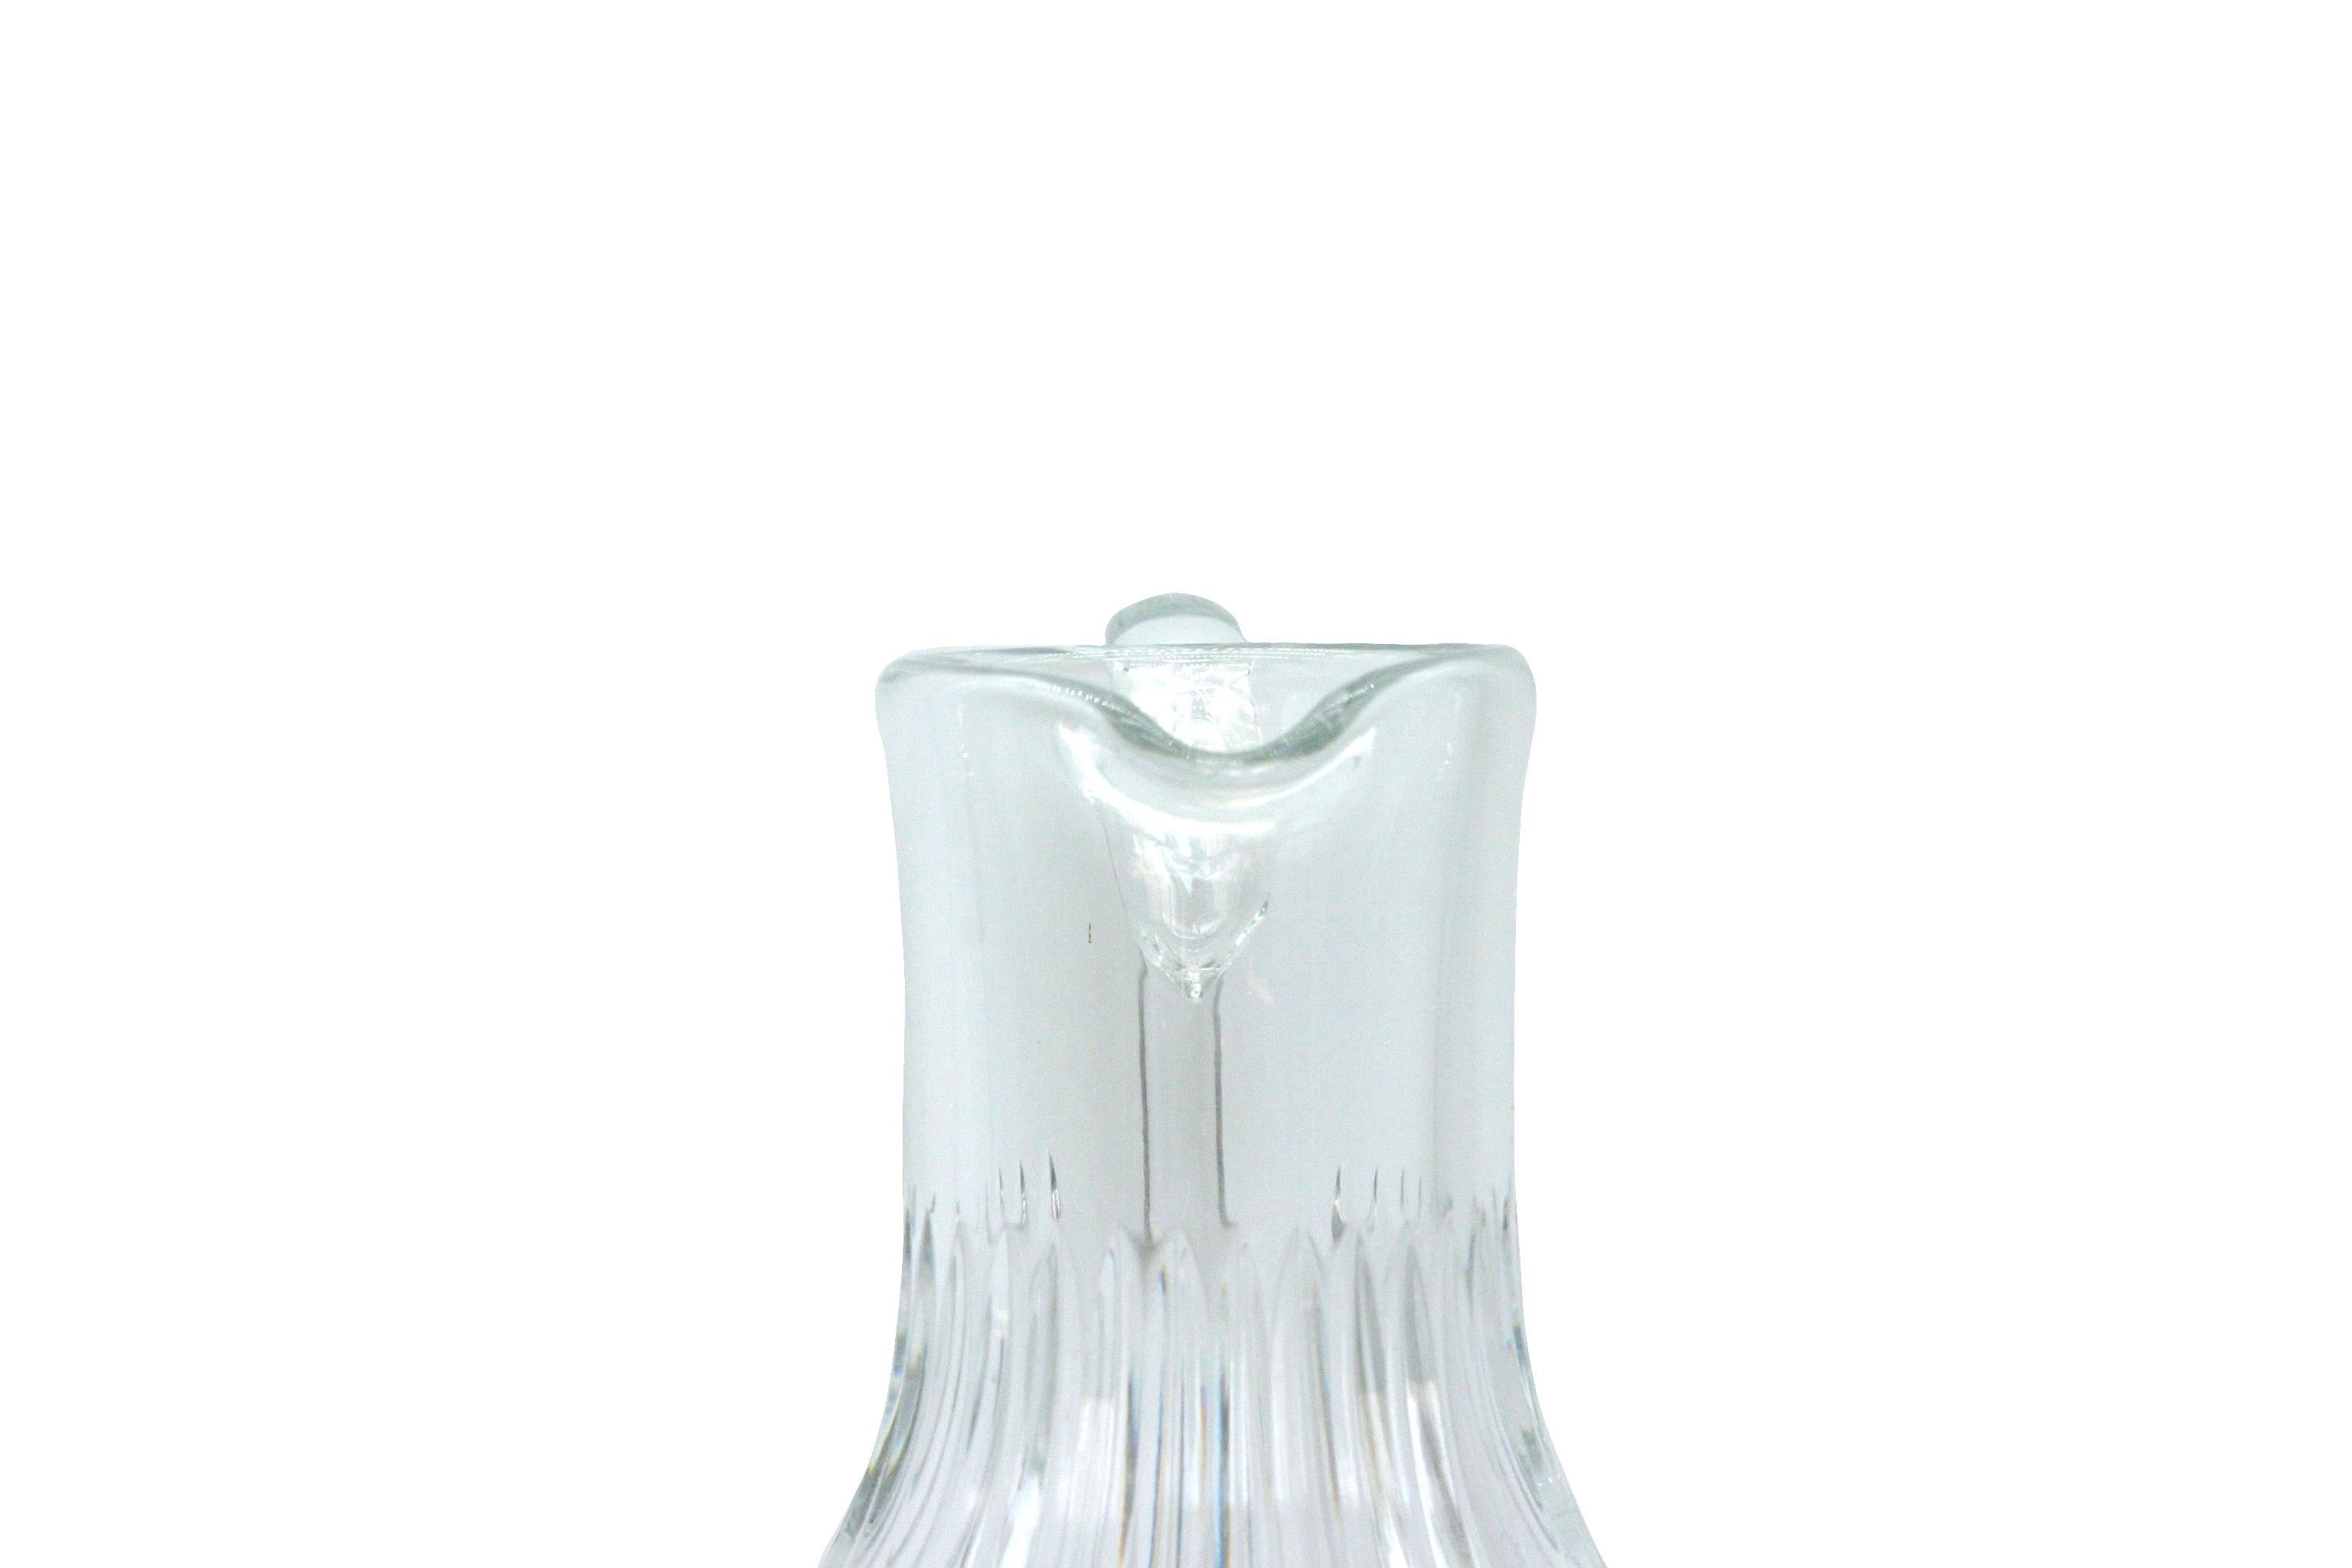 Baccarat Crystal Barware / Tableware Pitcher For Sale 3